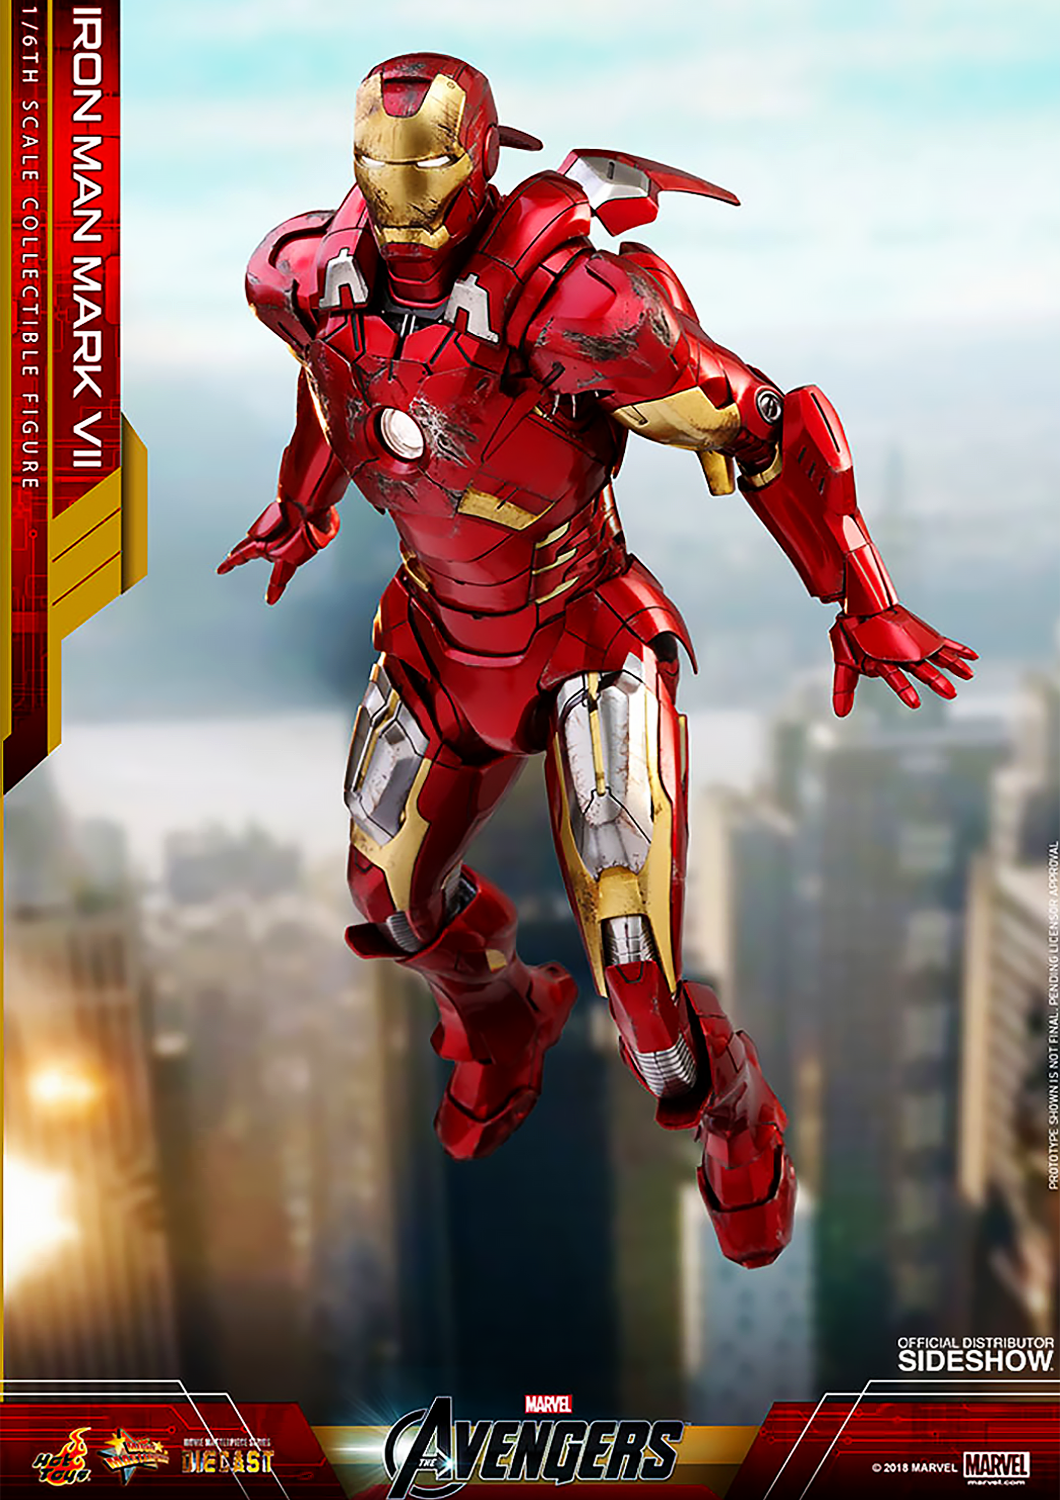 HOT TOYS MARVEL THE AVENGERS IRON MAN COLLECTIBLE FIGURE MARK VII - MARK 7 SPECIAL EDITION 1/6 MMS500-D27SE - Anotoys Collectibles